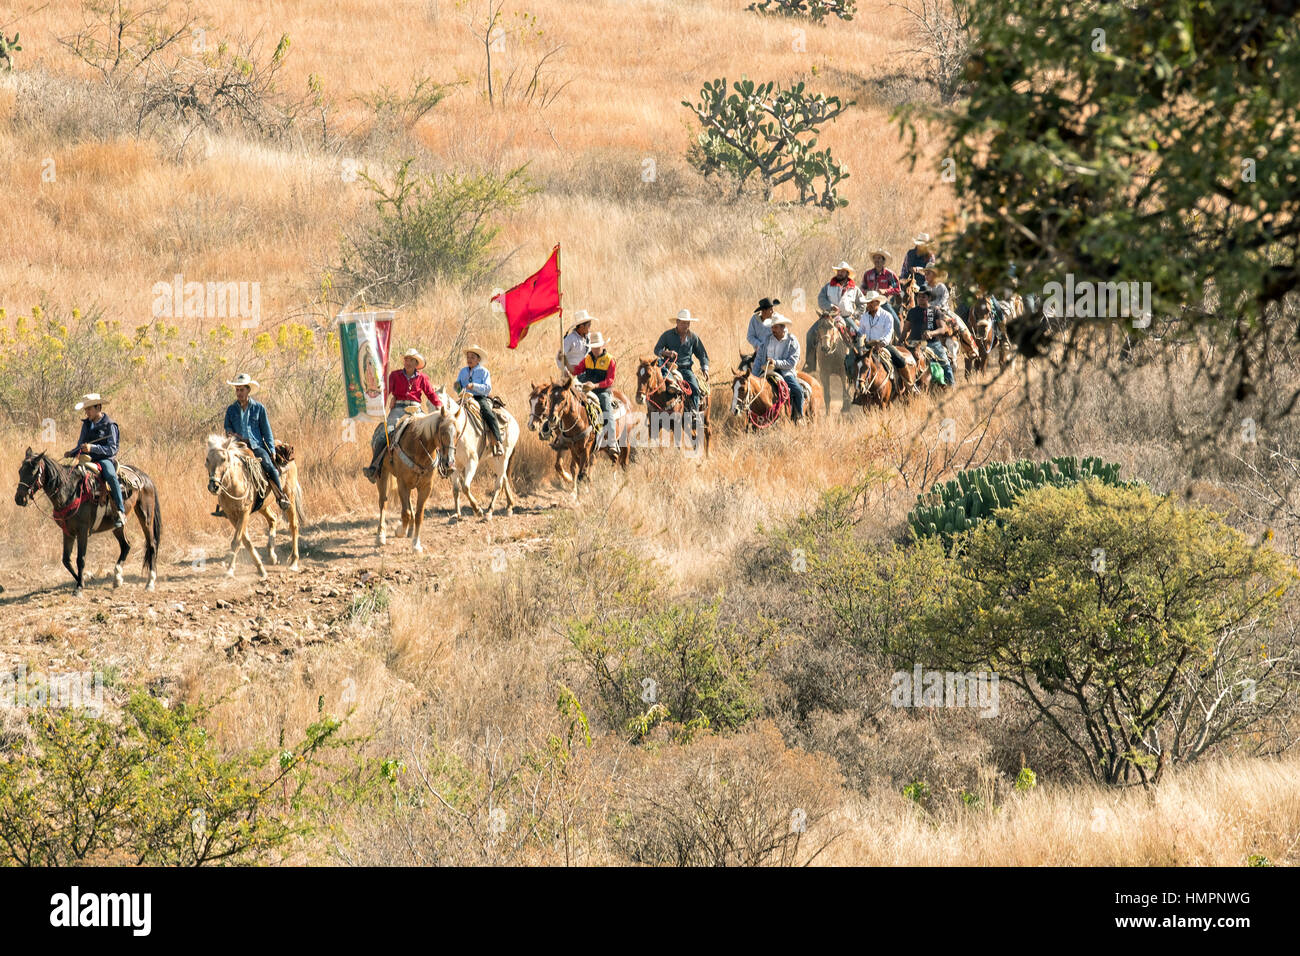 Hundreds of Mexican cowboys ride through the high desert during the annual Cabalgata de Cristo Rey pilgrimage January 5, 2017 in La Trinidad, Guanajuato, Mexico. Thousands of Mexican cowboys and horse take part in the three-day ride to the mountaintop shrine of Cristo Rey stopping along the way at shrines and churches. Stock Photo